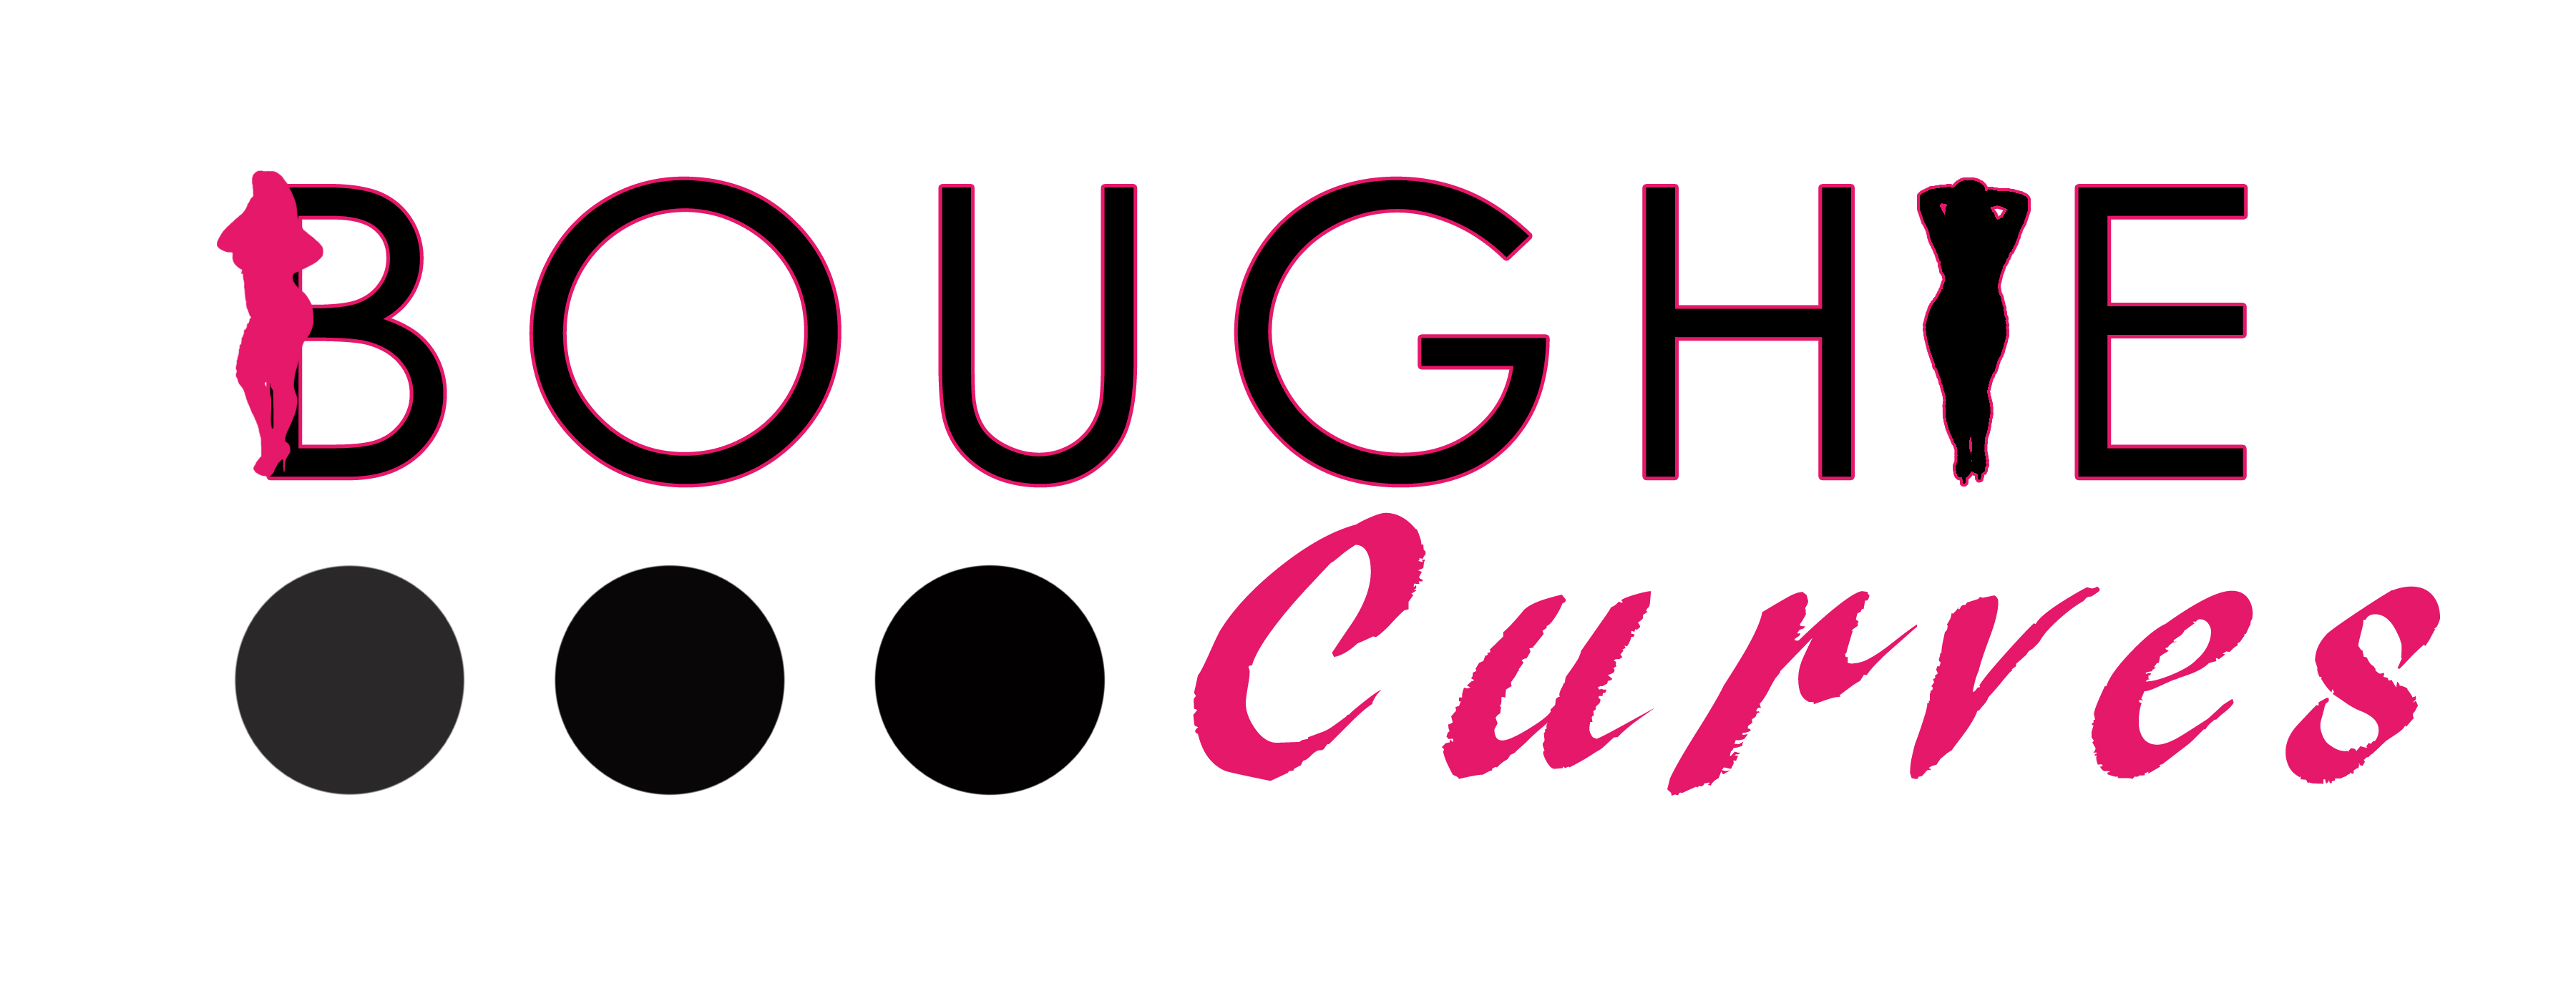 The logo or business face of "Boughie Curves"